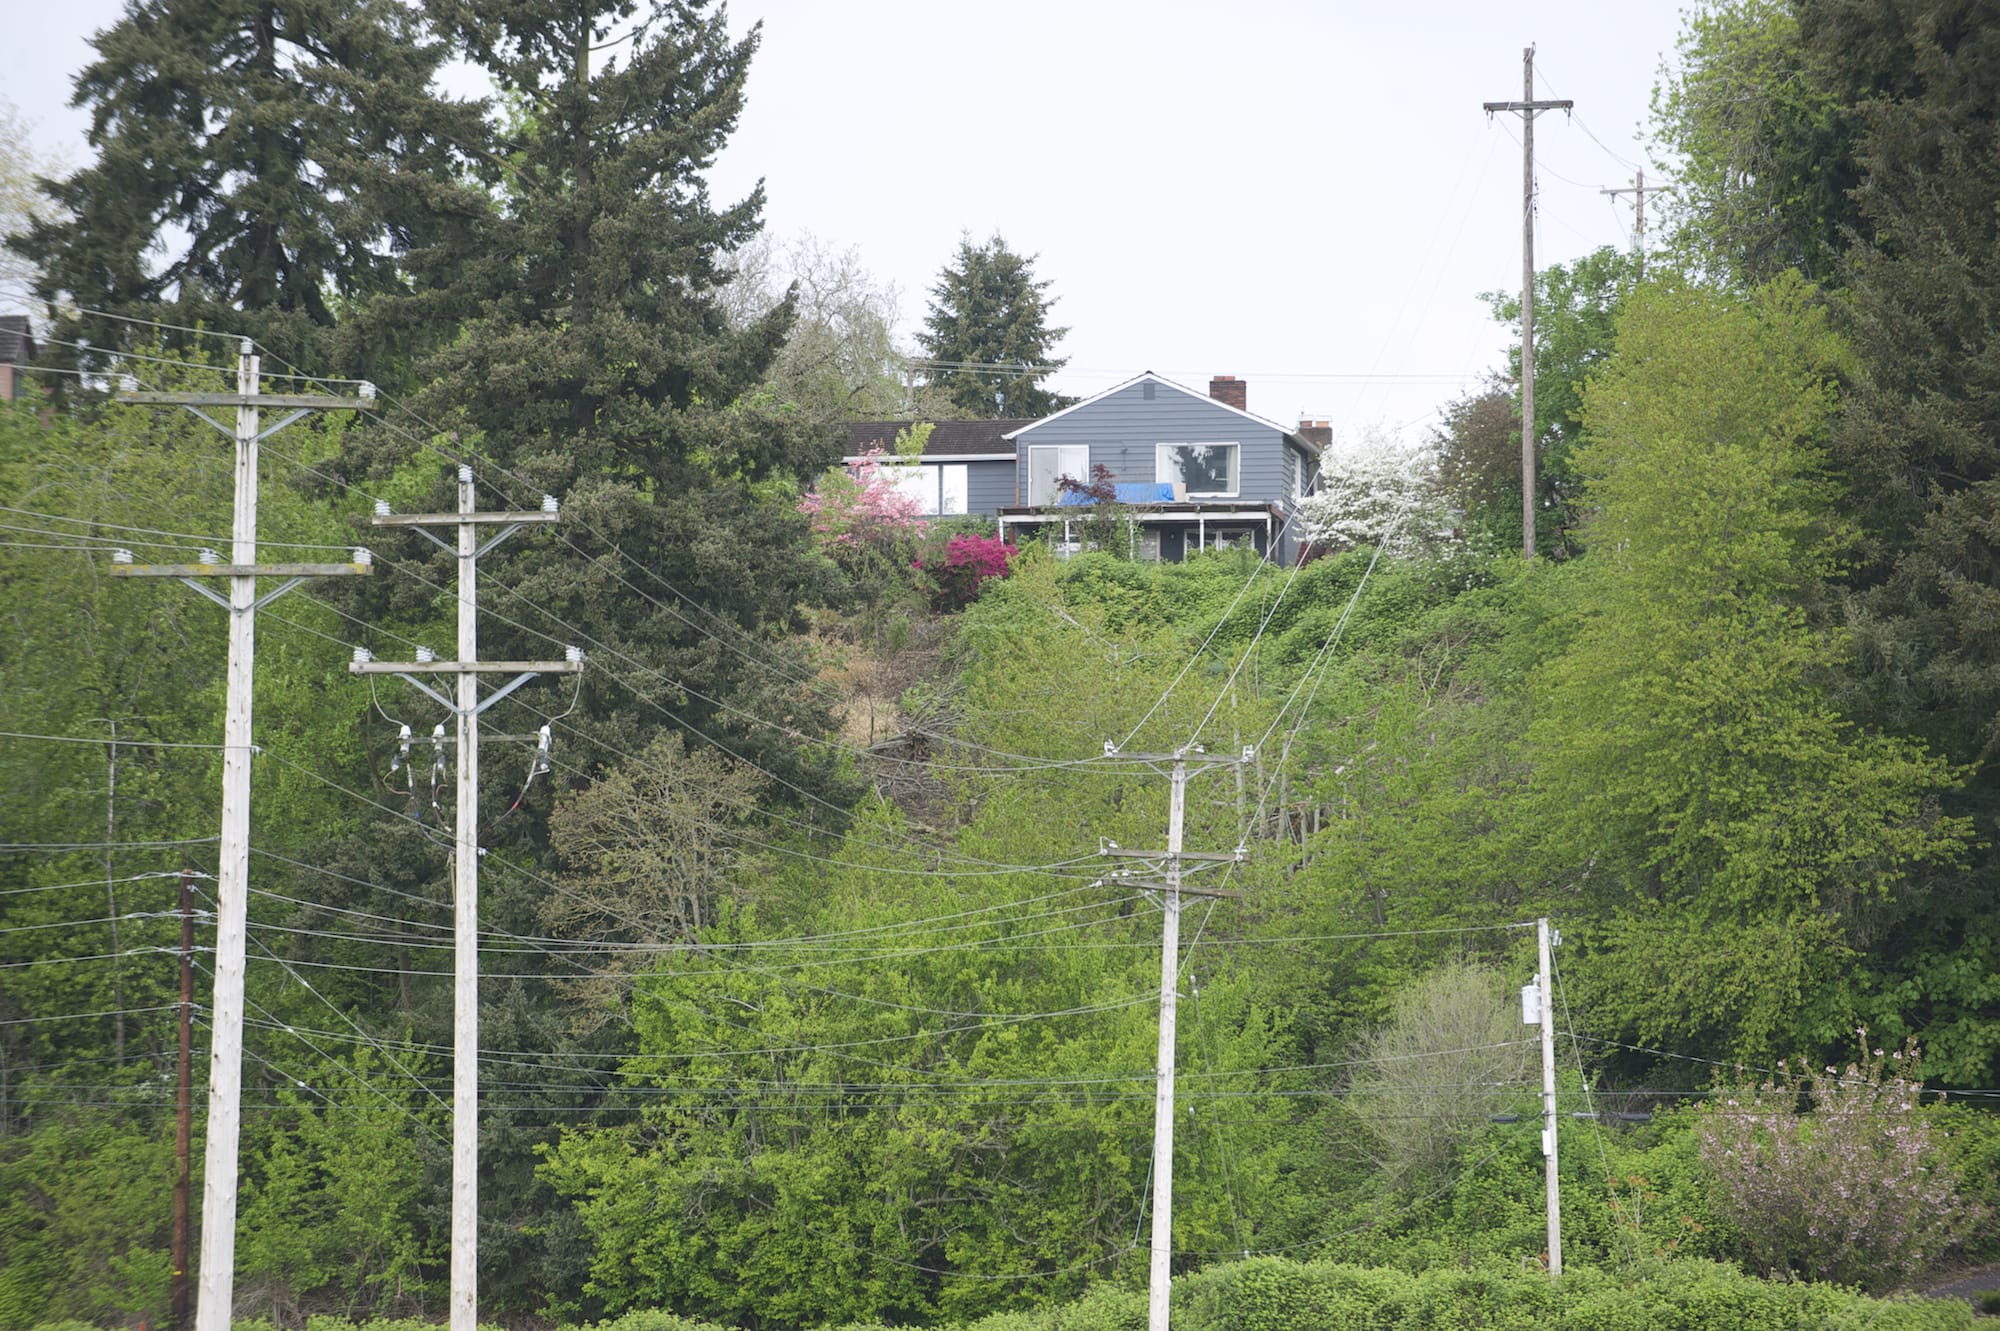 A Vancouver man allegedly cleared trees from this 15,000 square foot area of land below his home earlier this month.